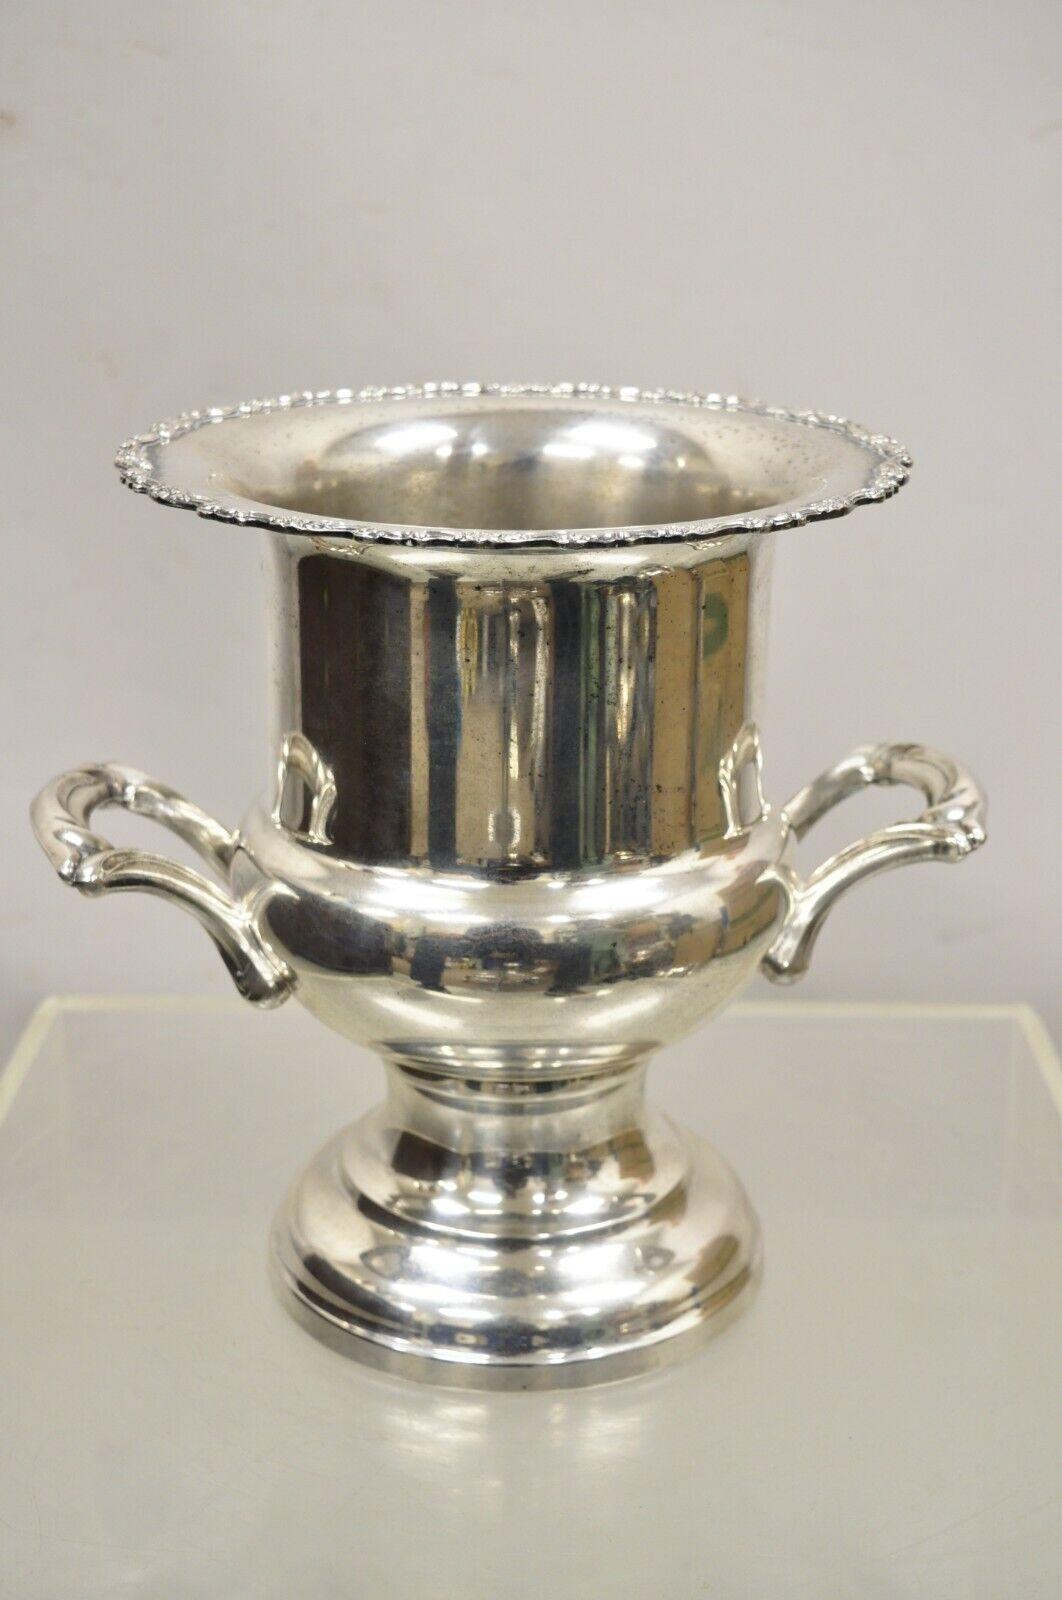 Vintage Oneida Silver Plated Victorian Style Wine Champagne Chiller Ice Bucket. Circa Mid 20th Century. Measurements: 10.5